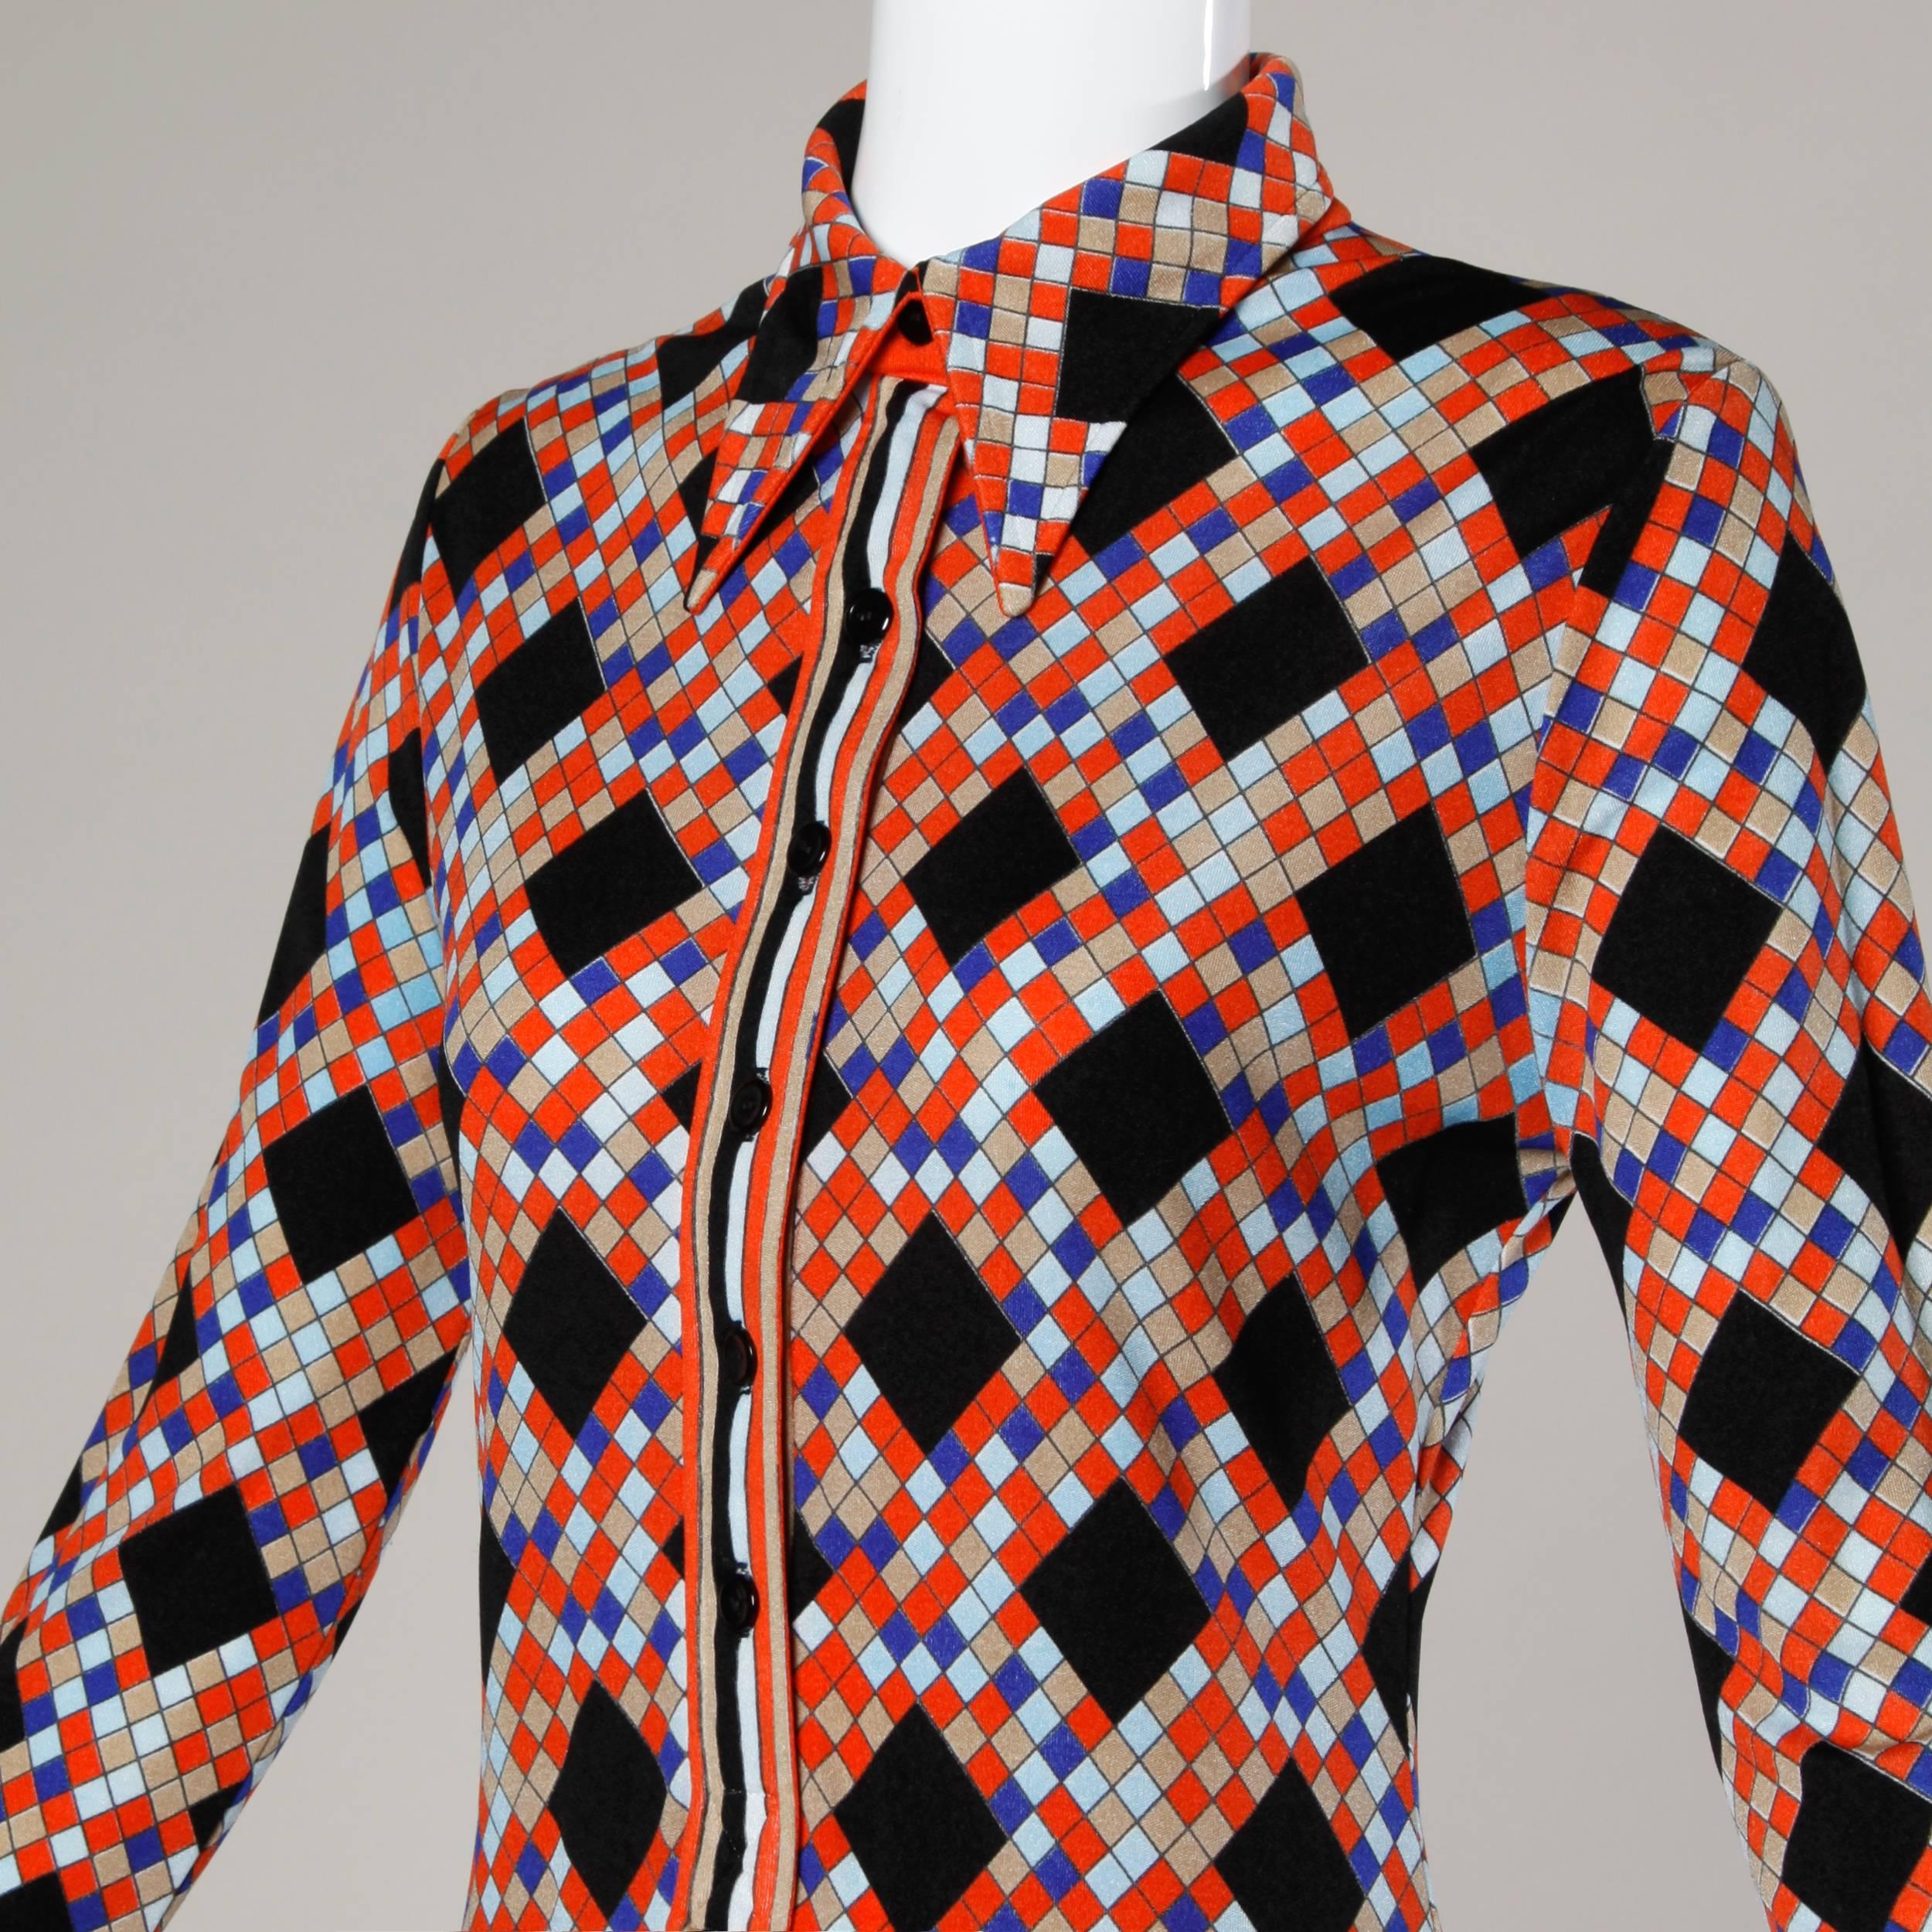 Graphic op art printed shirt dress by Mr. Dino in vibrant colors. Button up front and long sleeves. Unlined light weight jersey knit. Fits like a size small. Bust: 34